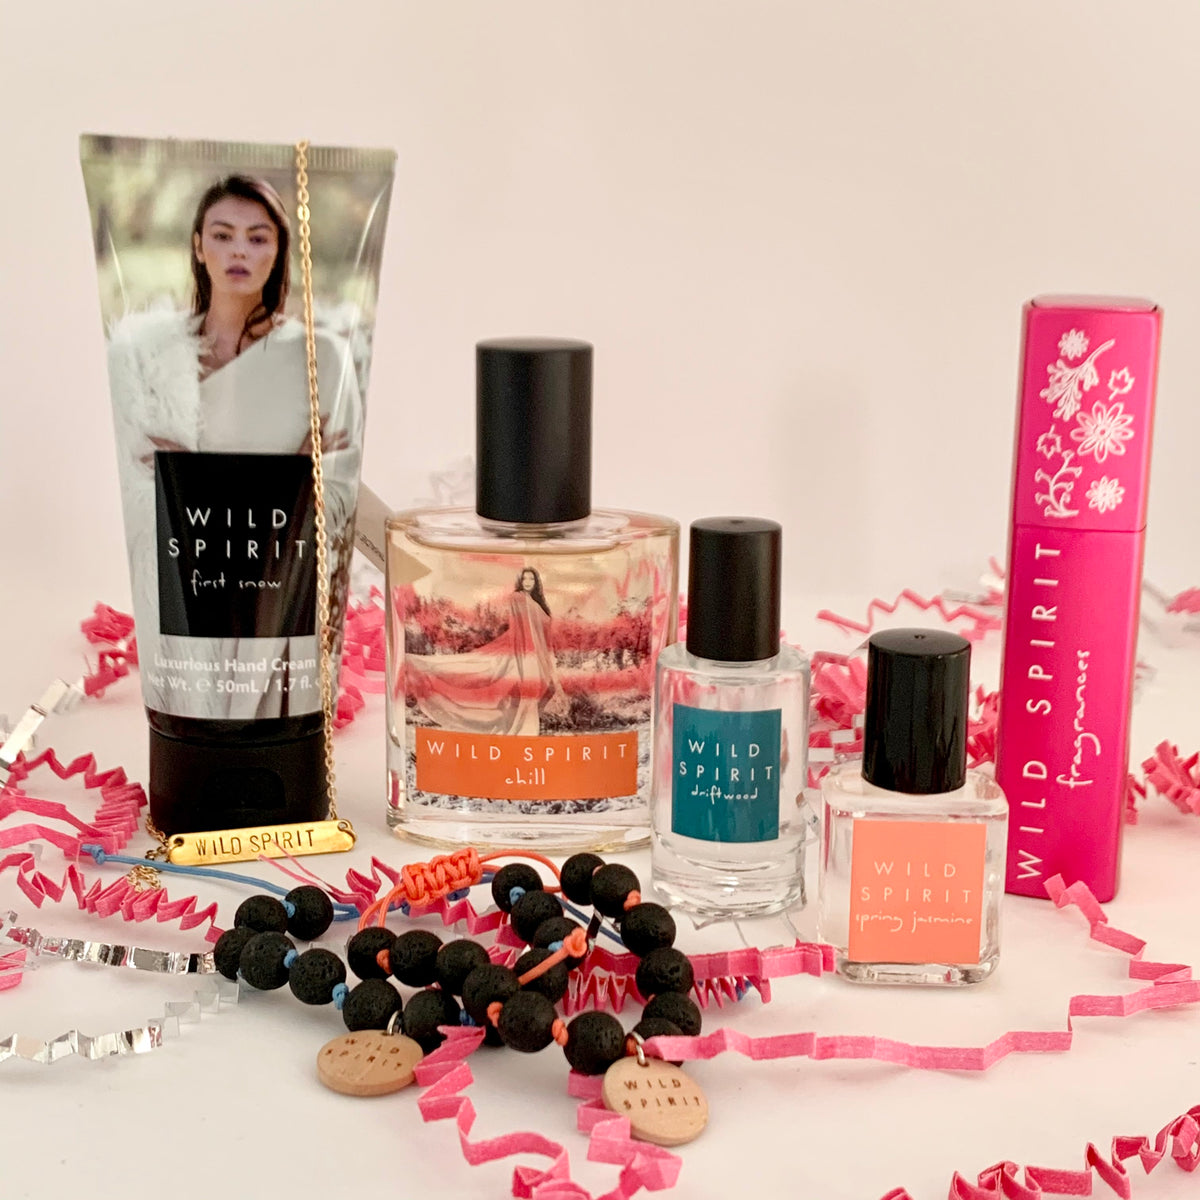 Whether a sweet, floral, fresh, or bold perfume lover, this kit has a little bit of everything and is full of mix and matching potential. Satisfy your sweet tooth with our best-selling Chill perfume, feel flirty on the go with a Rosy Glow Atomizer, keep hands moisturized with our First Snow Hand Cream, enjoy breezy florals with a Spring Jasmine Rollerball, stay fresh with a Driftwood Body Splash, and accessorize with our beautiful Wild Spirit Bar Necklace and two lava bead bracelets.